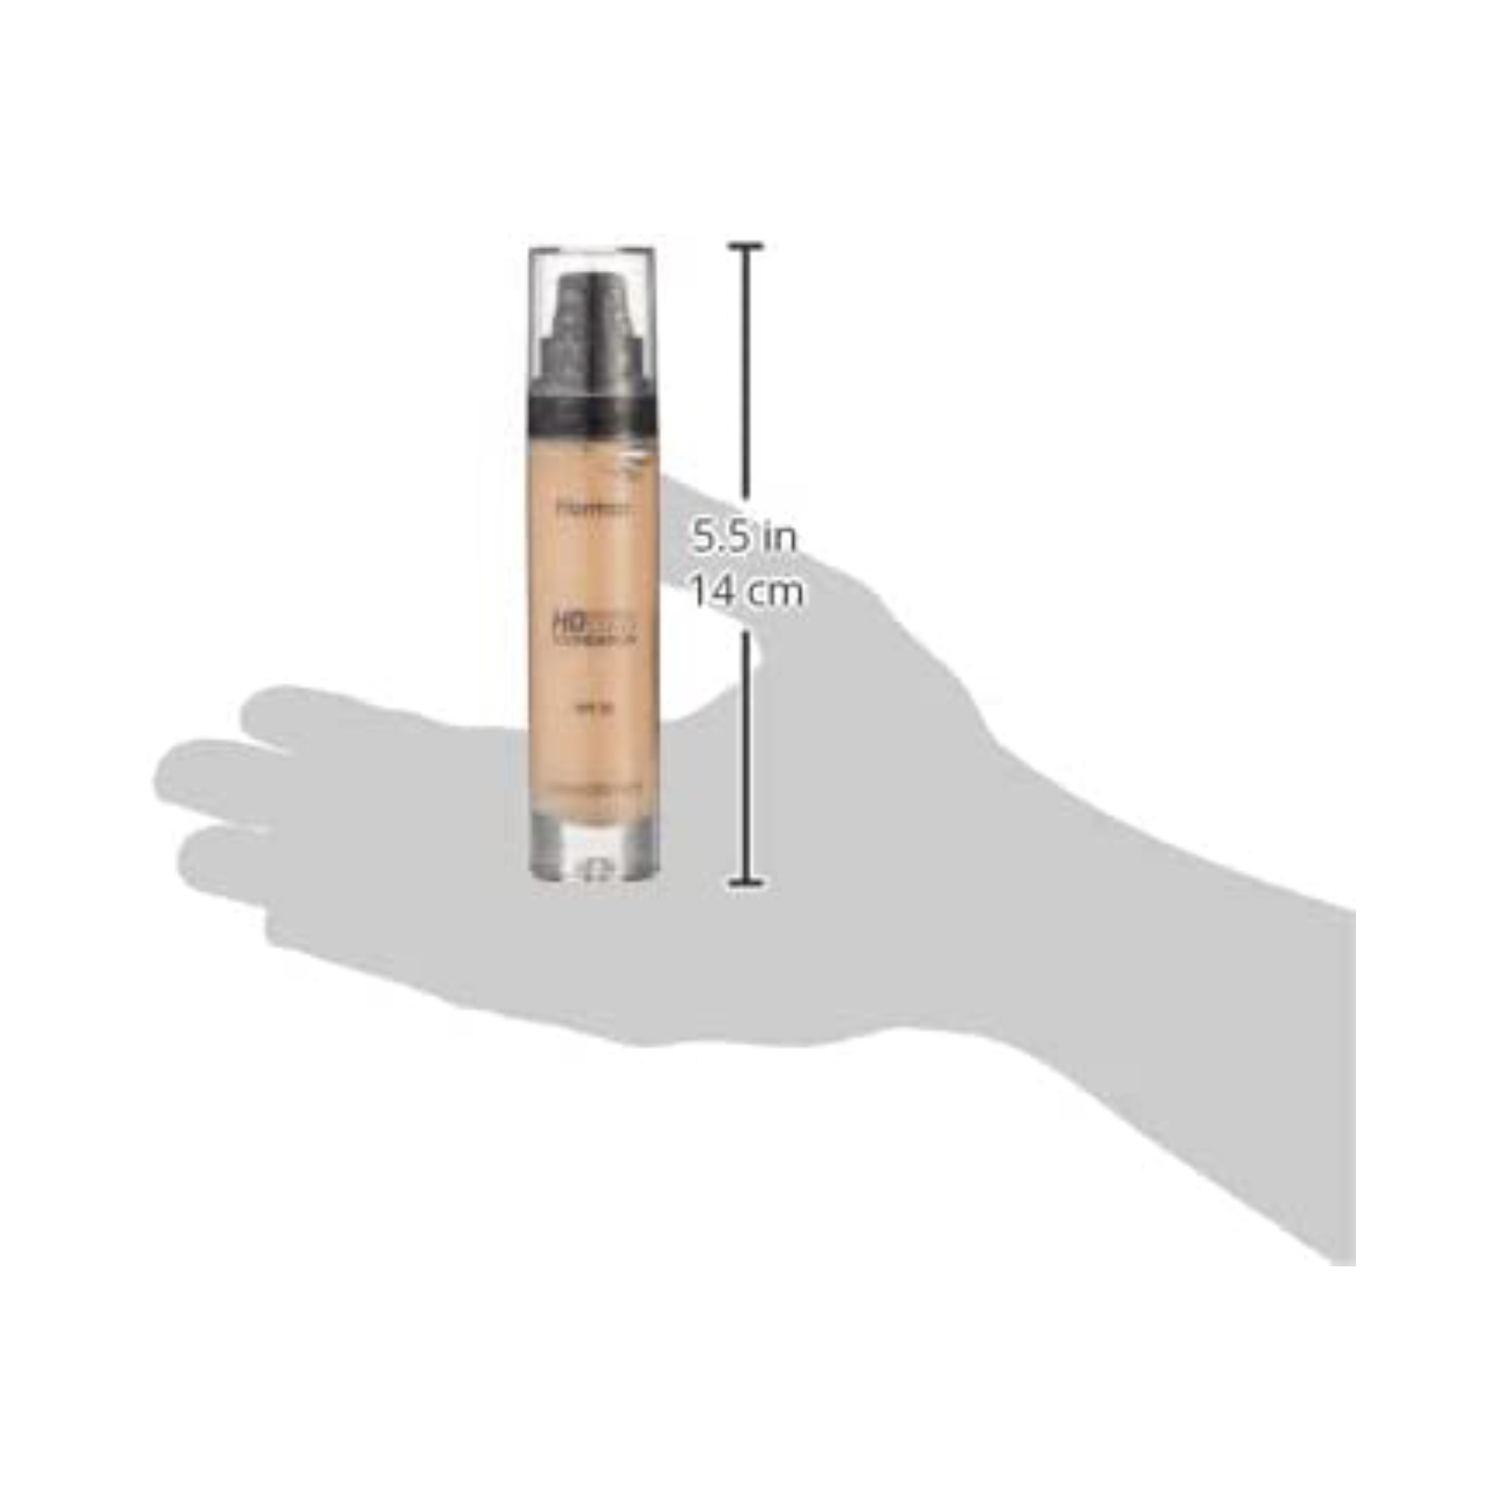 HD Invisible Cover foundation is always with you for a flawless, smooth and  uniform skin look! More at Flormar stores and at flormar.com